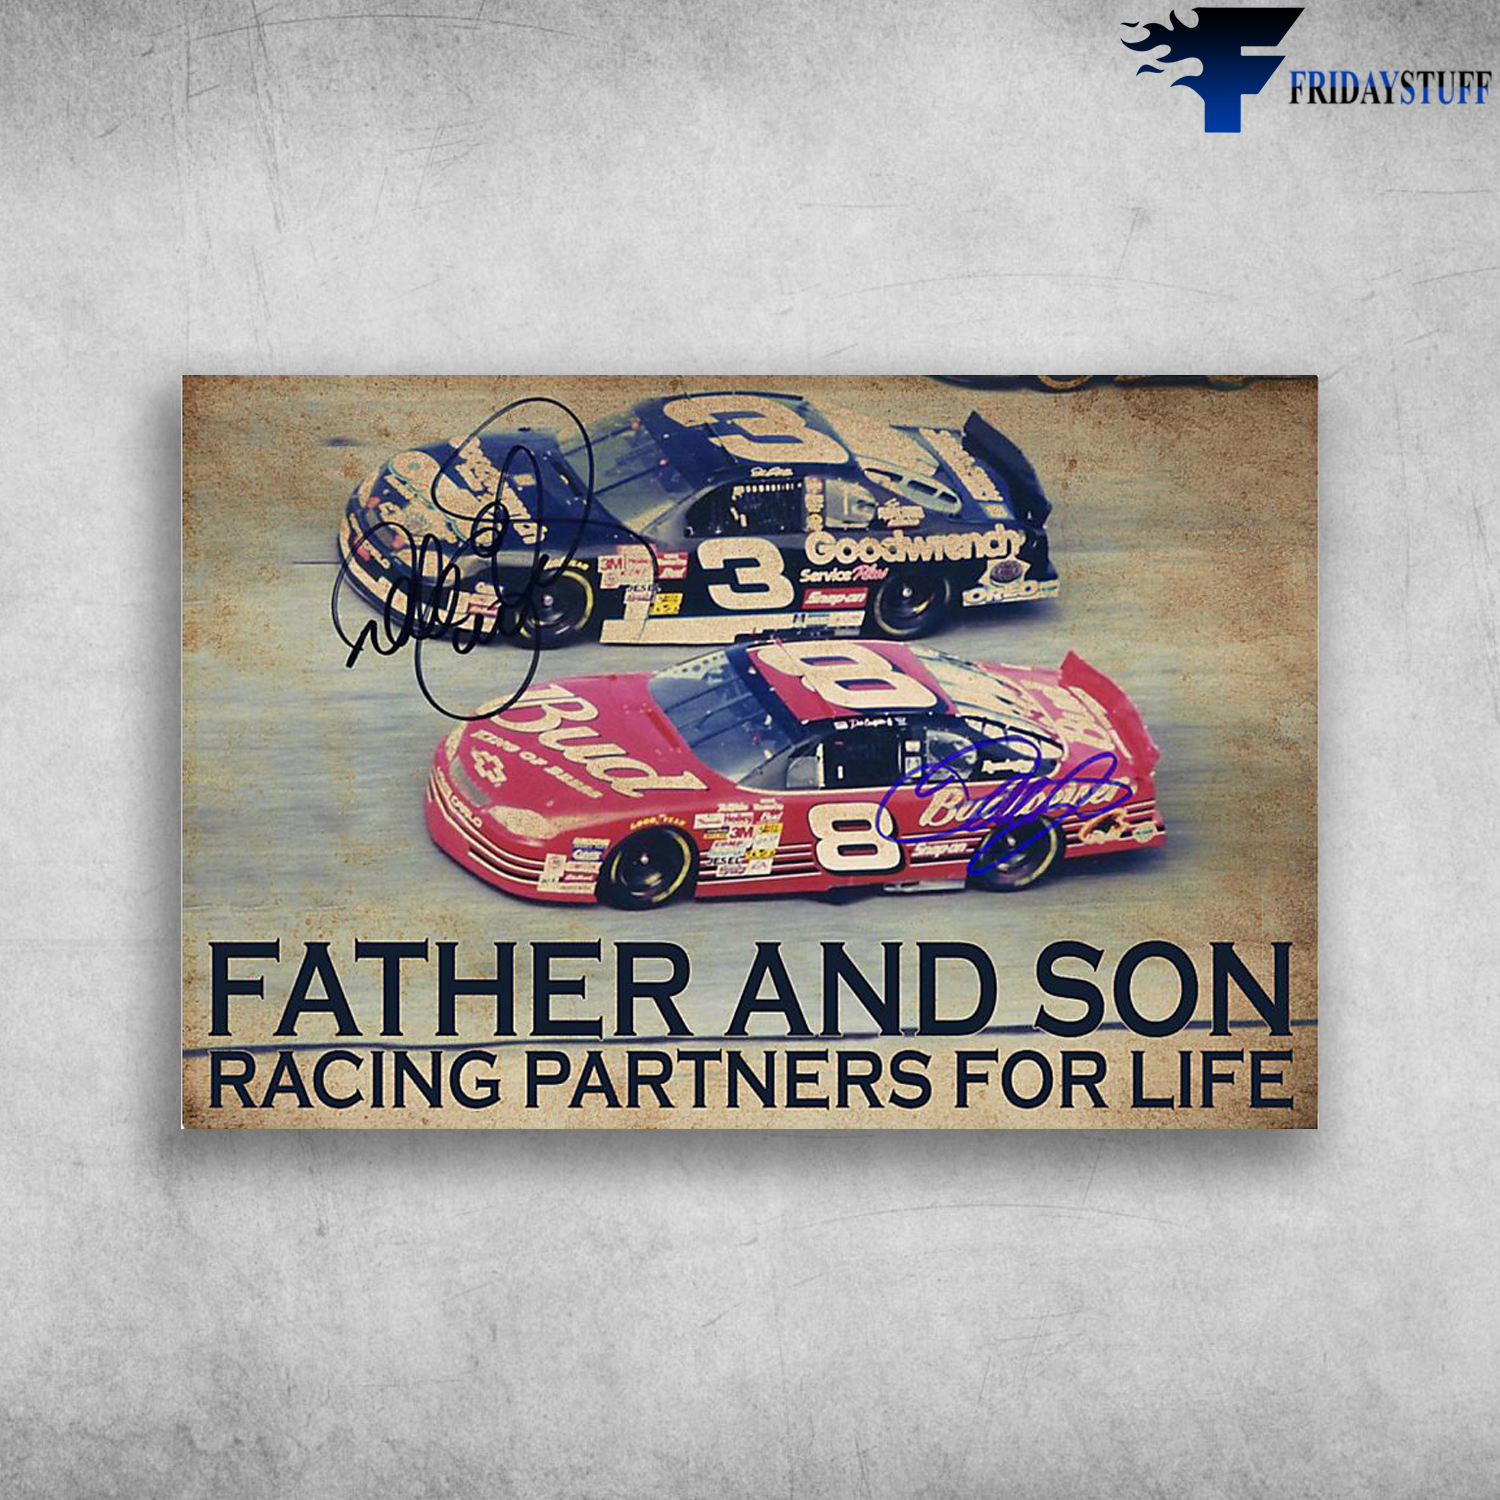 Racing Car - Father And Son, Racing Partners For Life